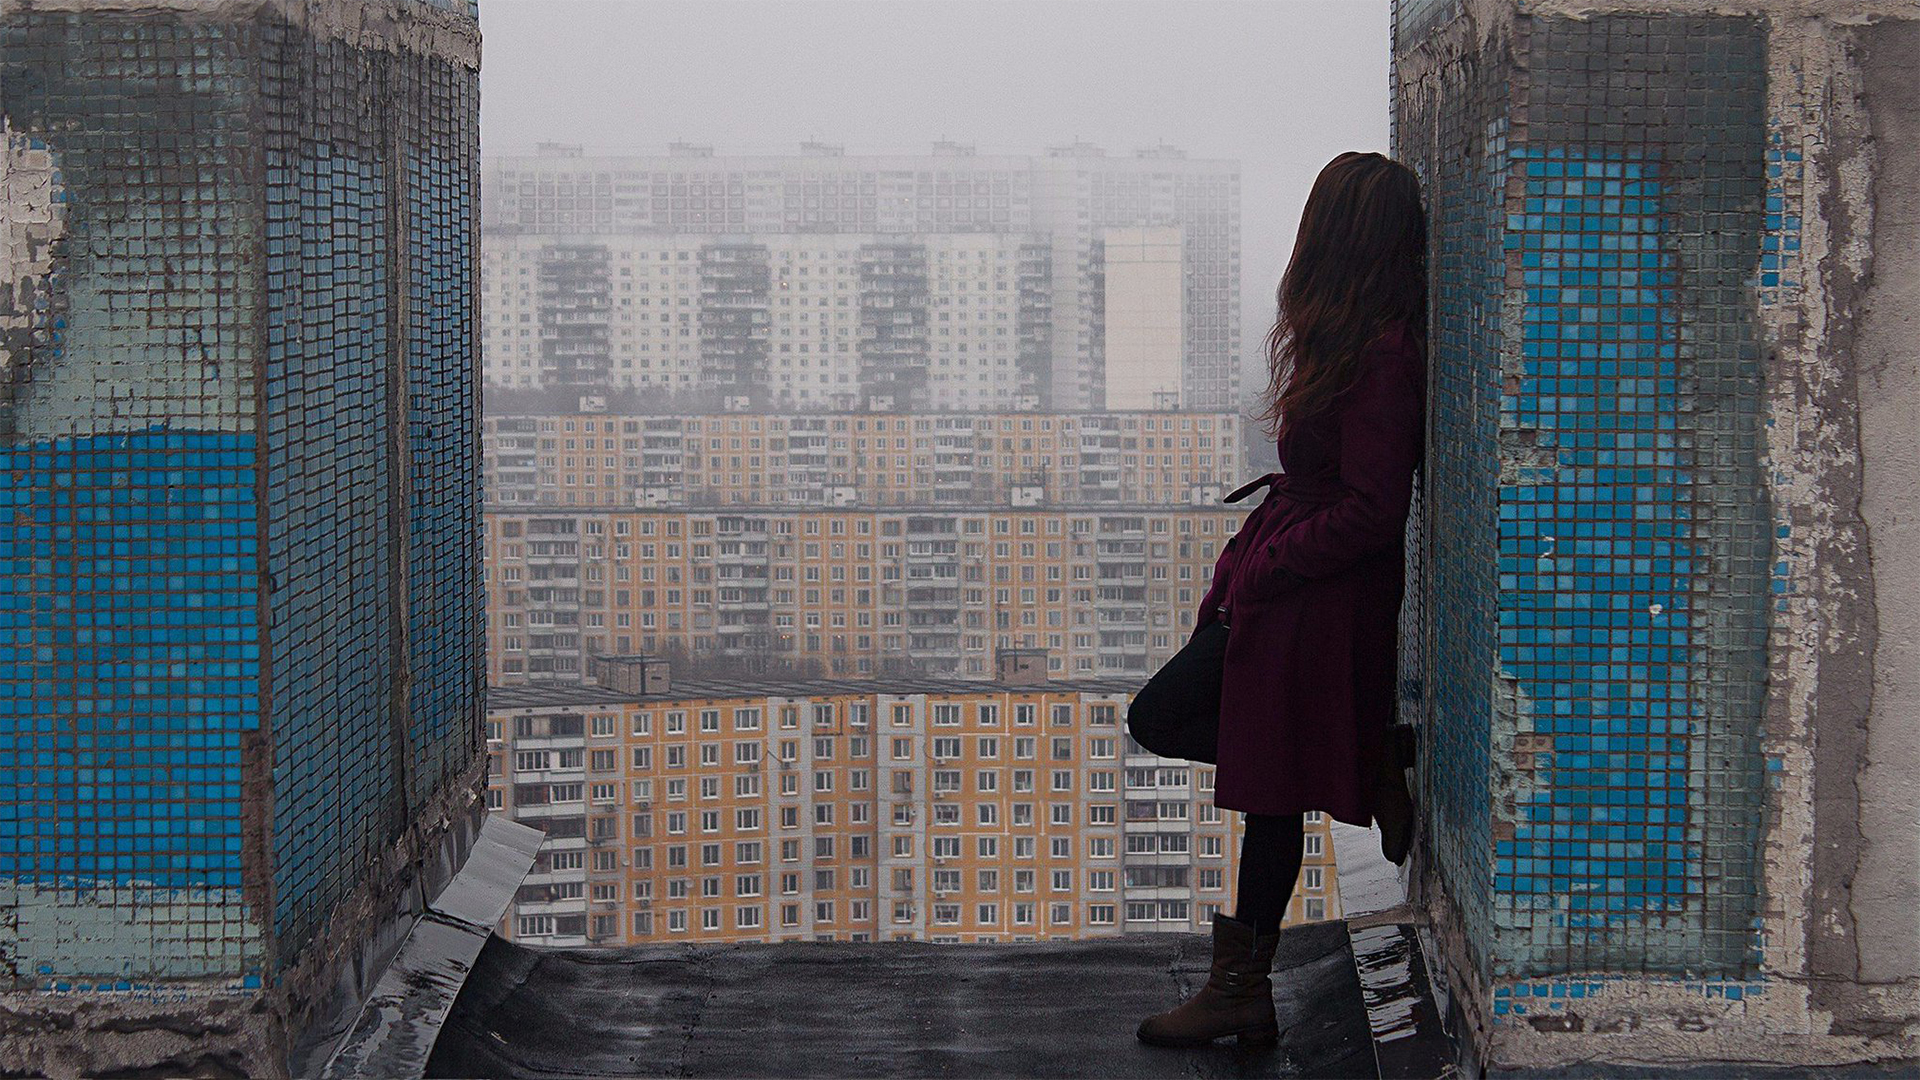 People 1920x1080 building women outdoors women cityscape urban model Moscow Russia mist alone loneliness coats overcoats solice rooftops gloomy violet coat hands in pockets brown boots